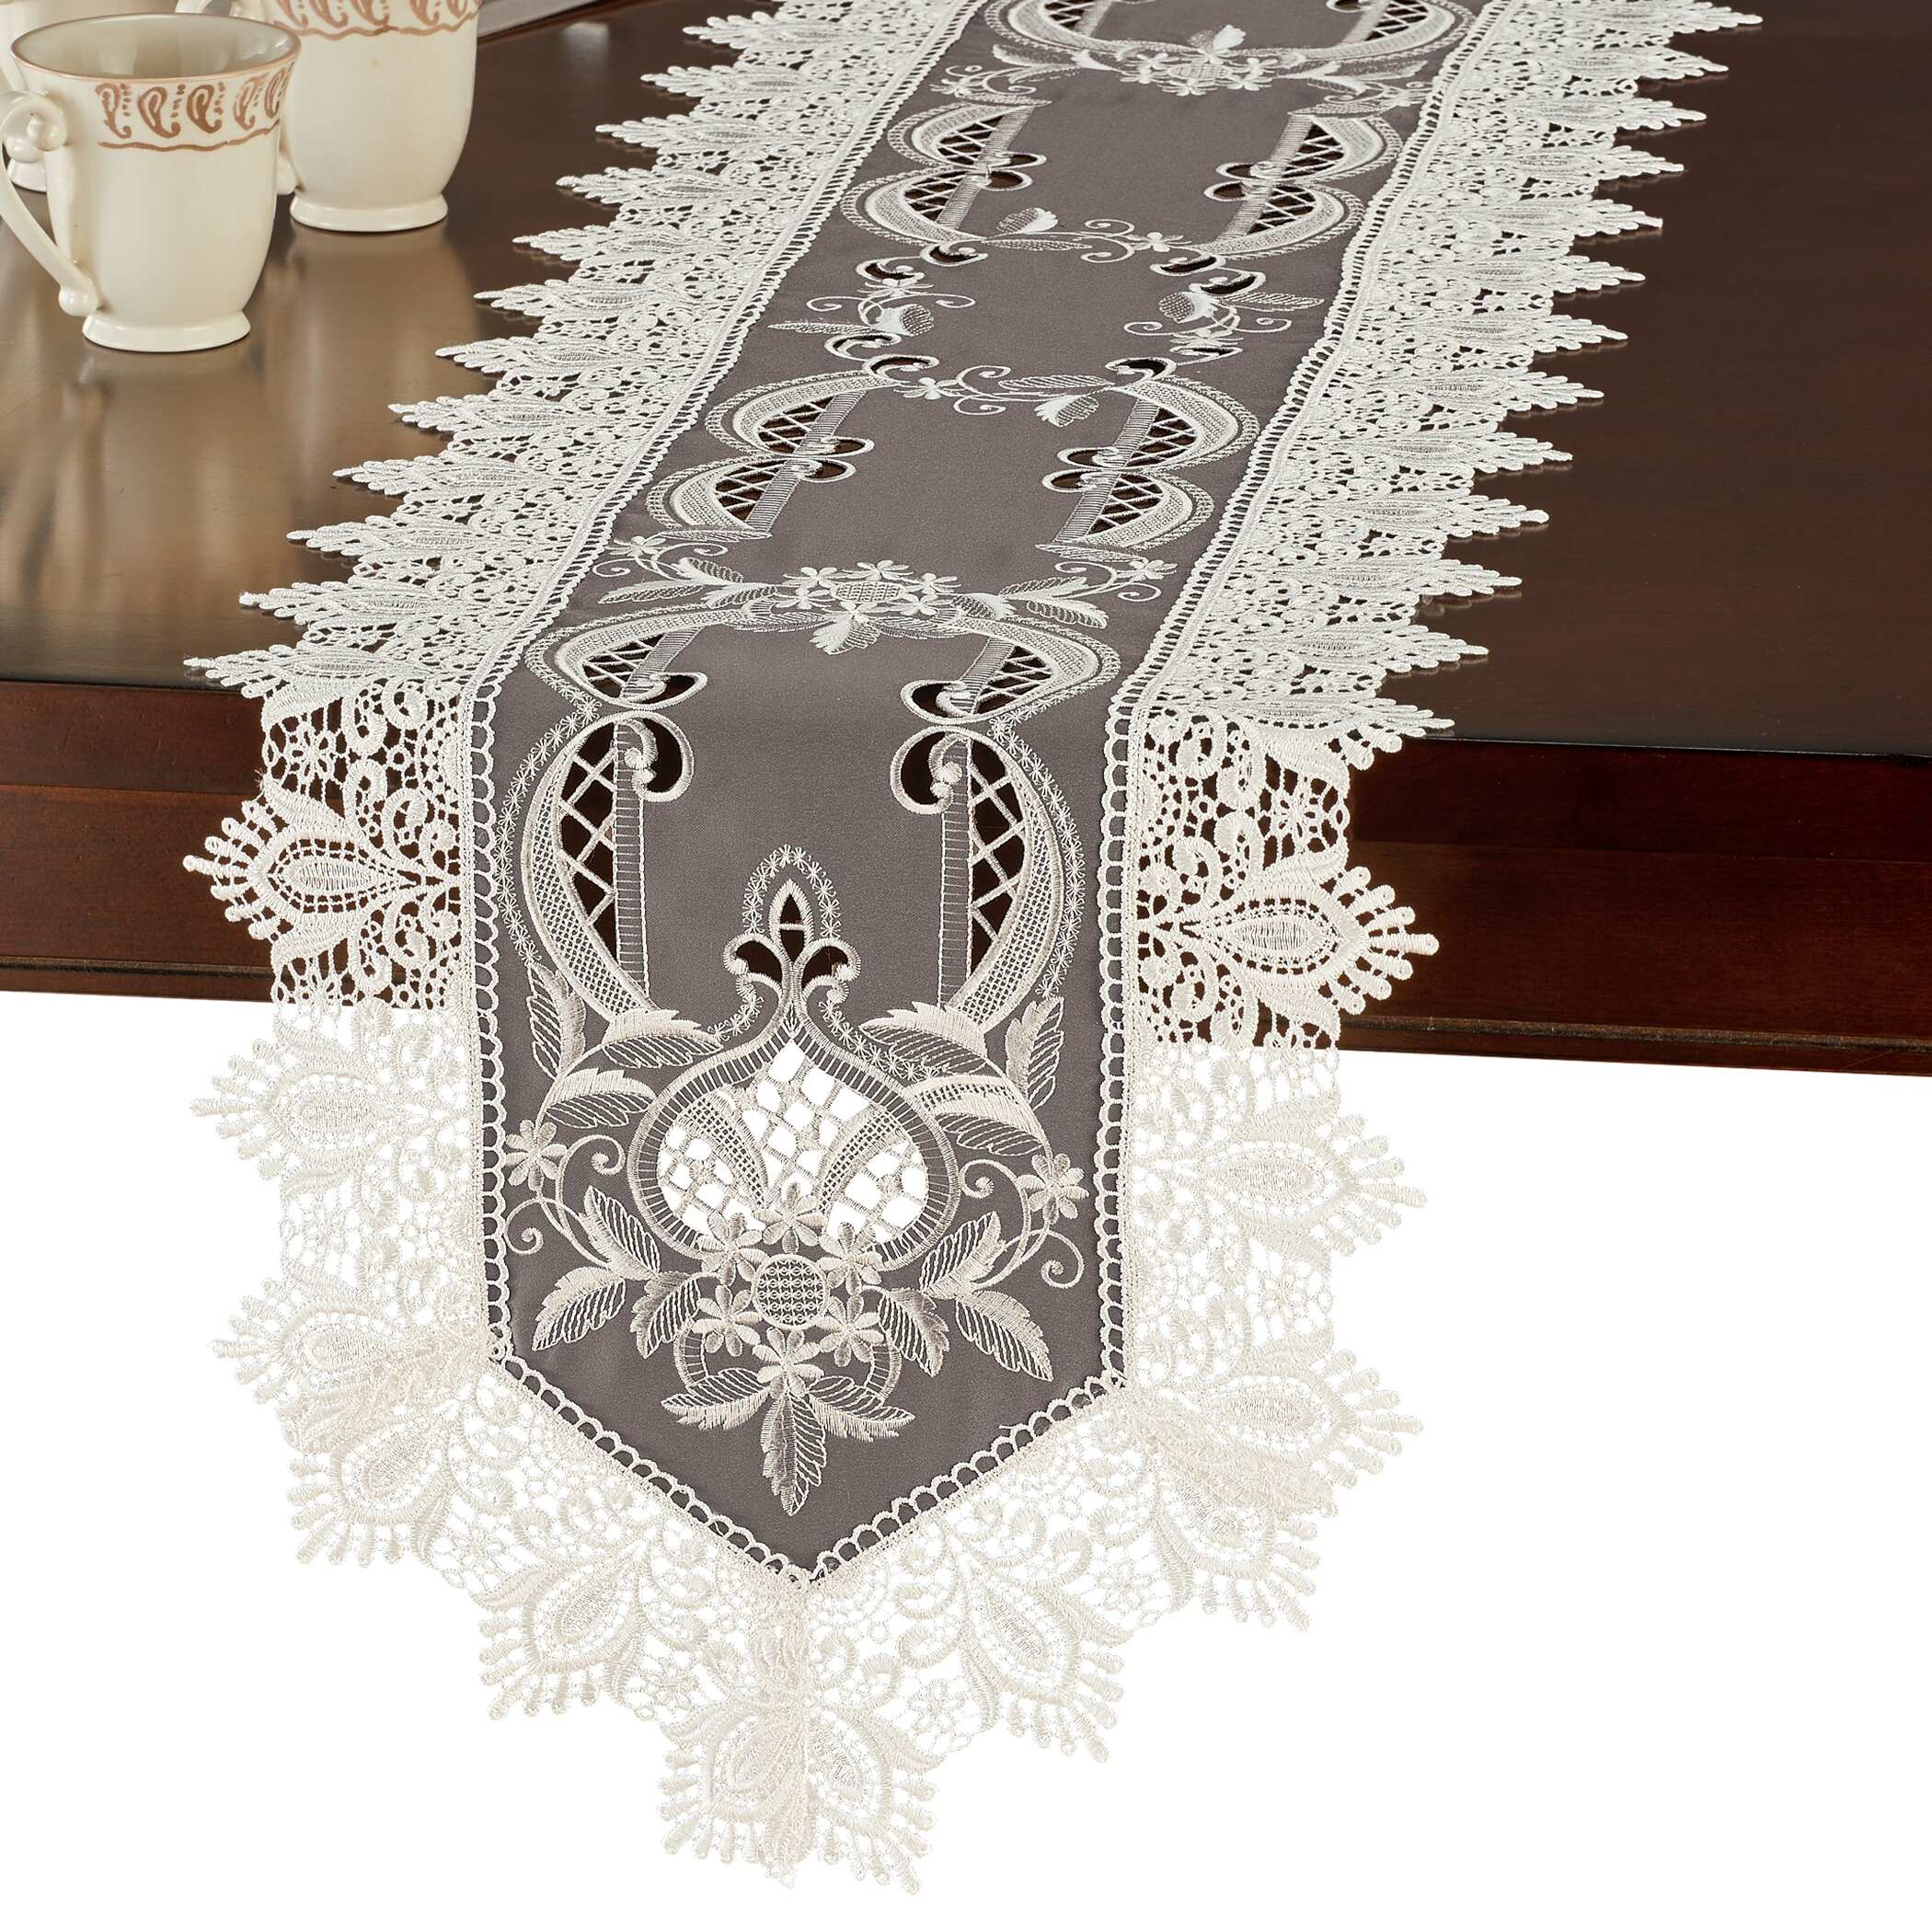 Dainty Lace Border Embroidered Table Linens - Square